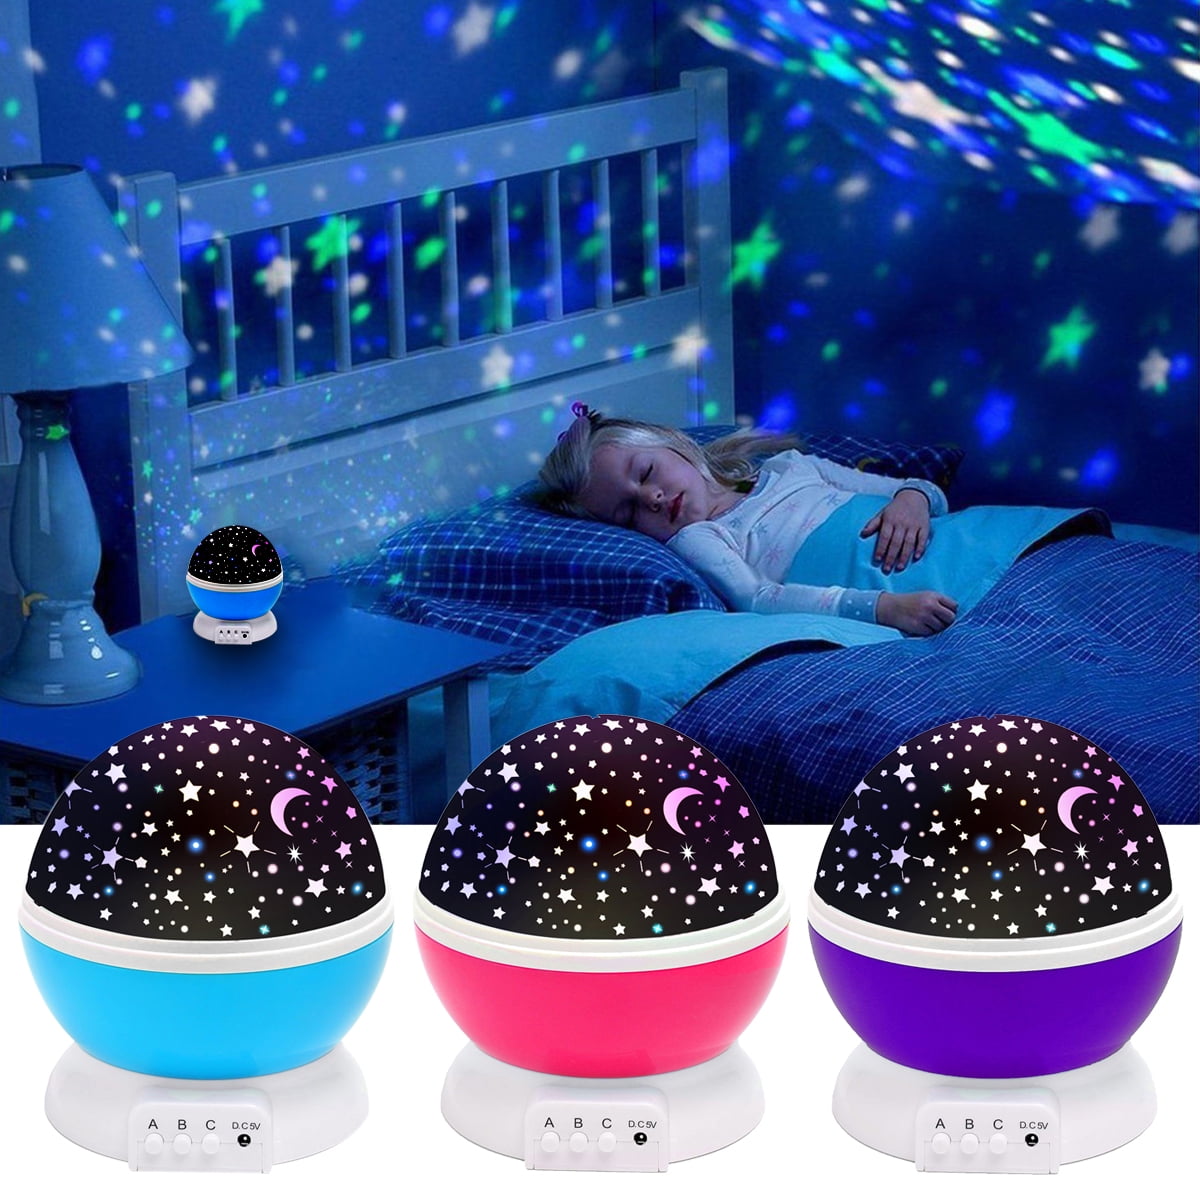 LED Projector Starry Night Light Rotating Star Sky Romantic Projection Lamp Gift 